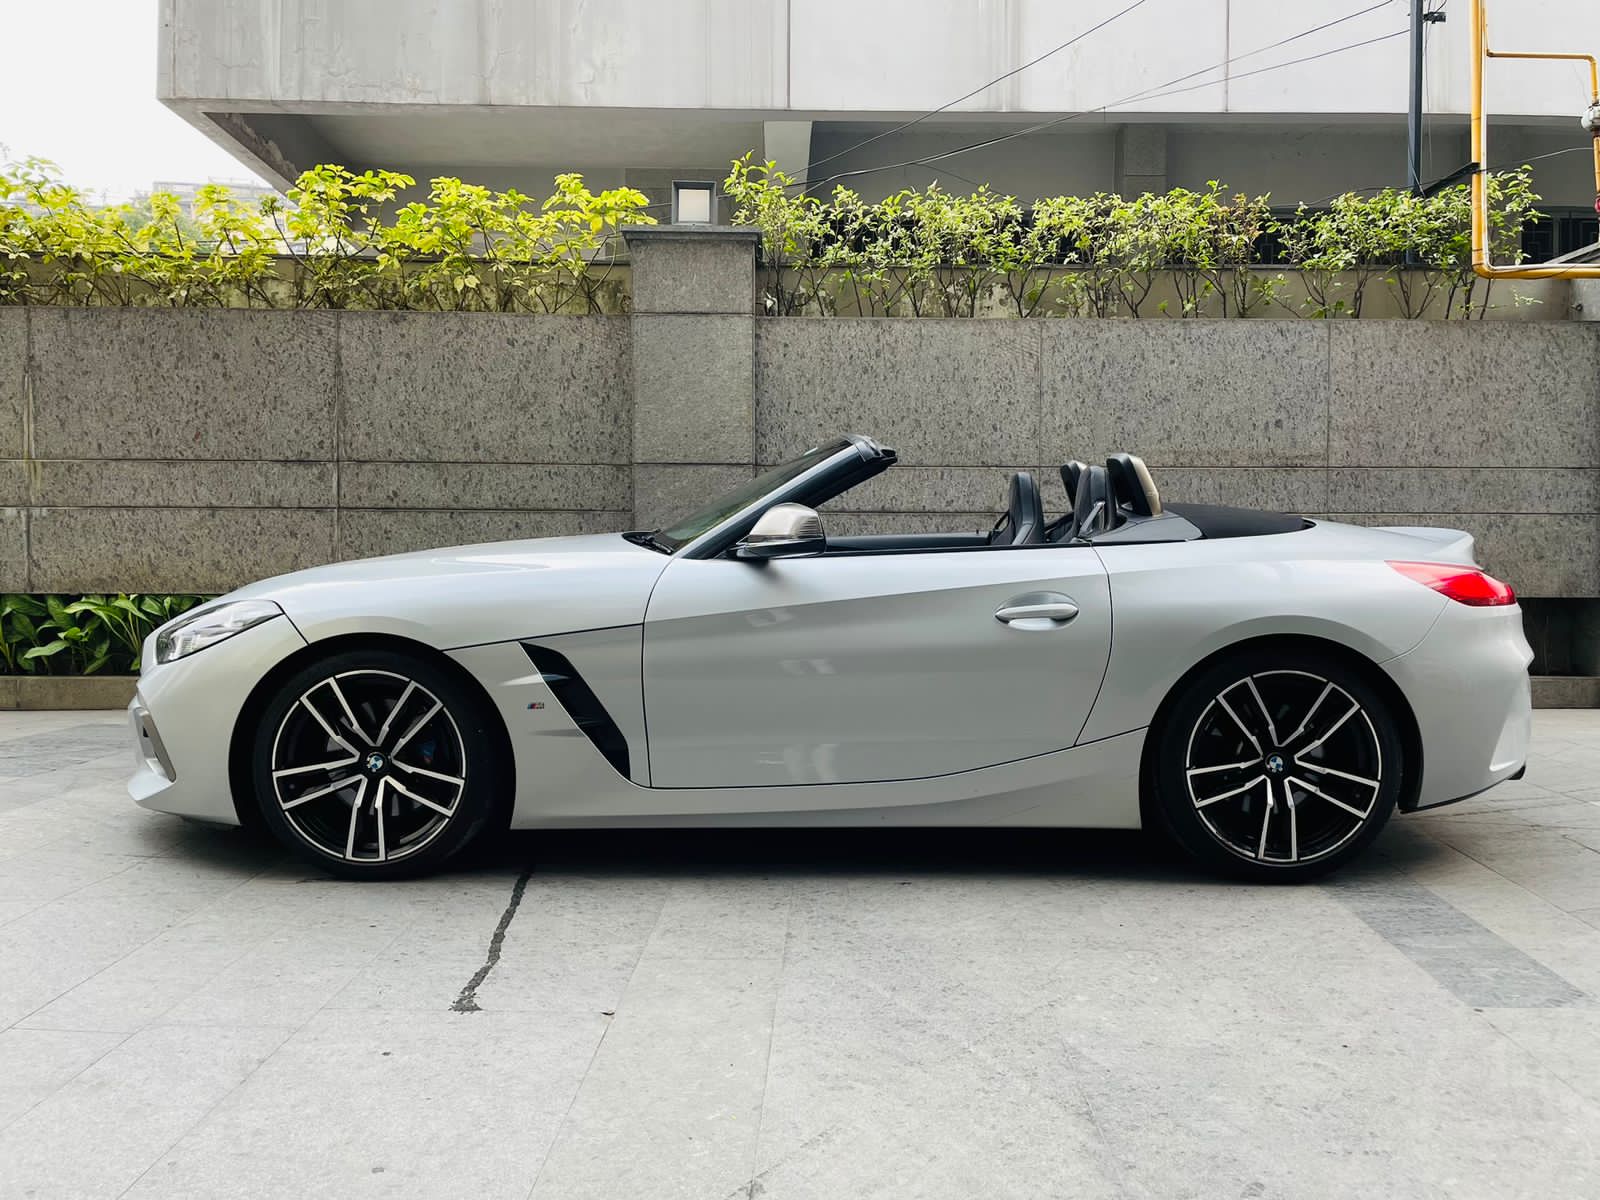 Explore these 10 must-see luxury convertible cars right now.